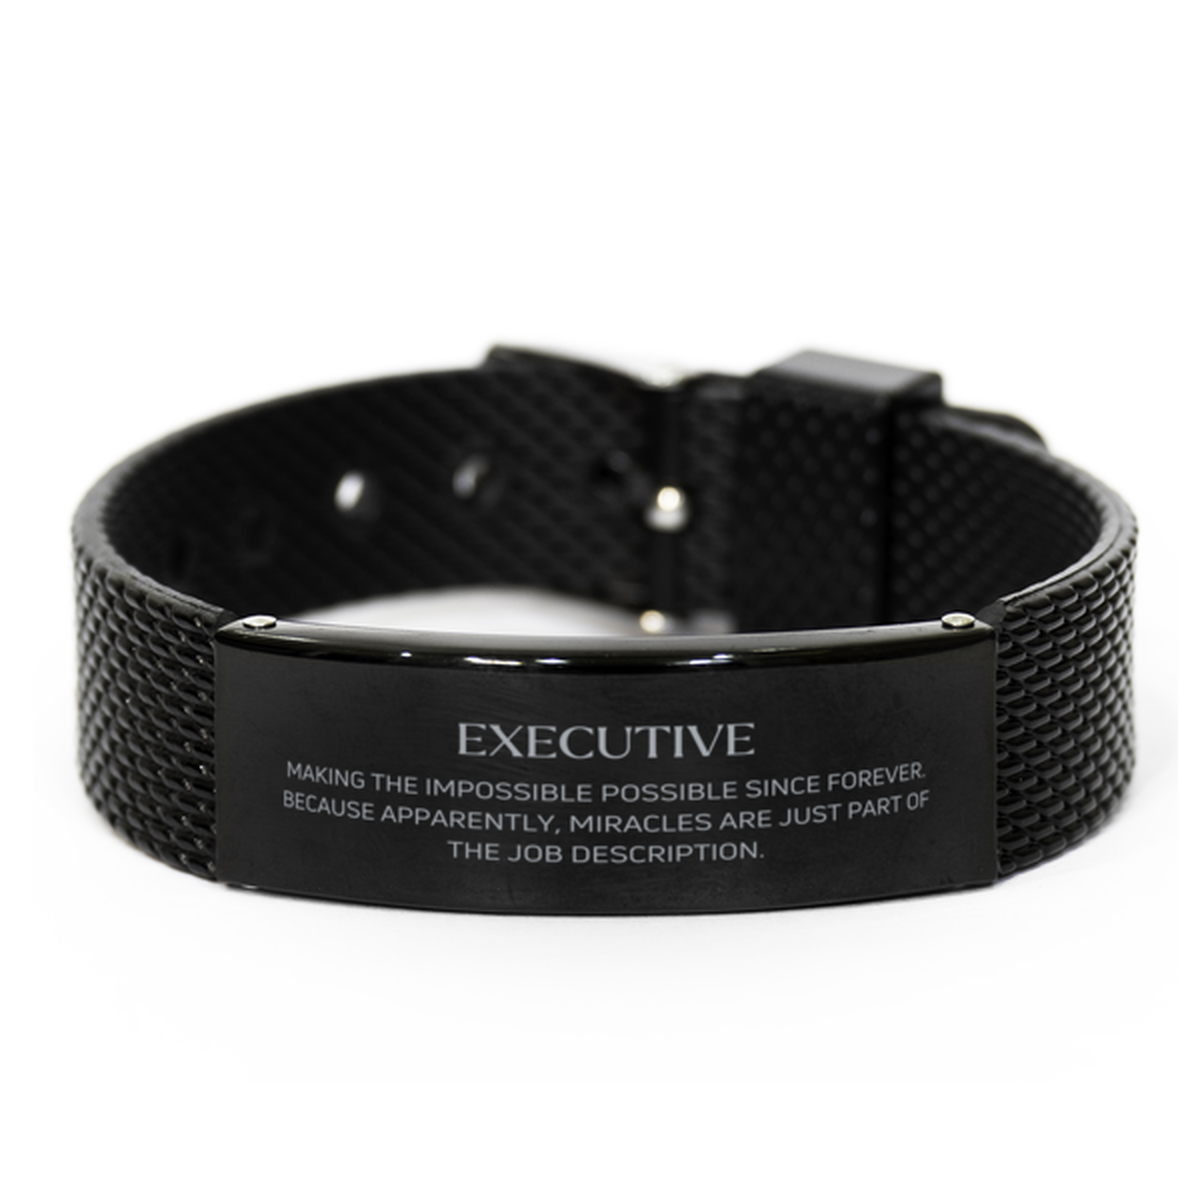 Funny Executive Gifts, Miracles are just part of the job description, Inspirational Birthday Black Shark Mesh Bracelet For Executive, Men, Women, Coworkers, Friends, Boss